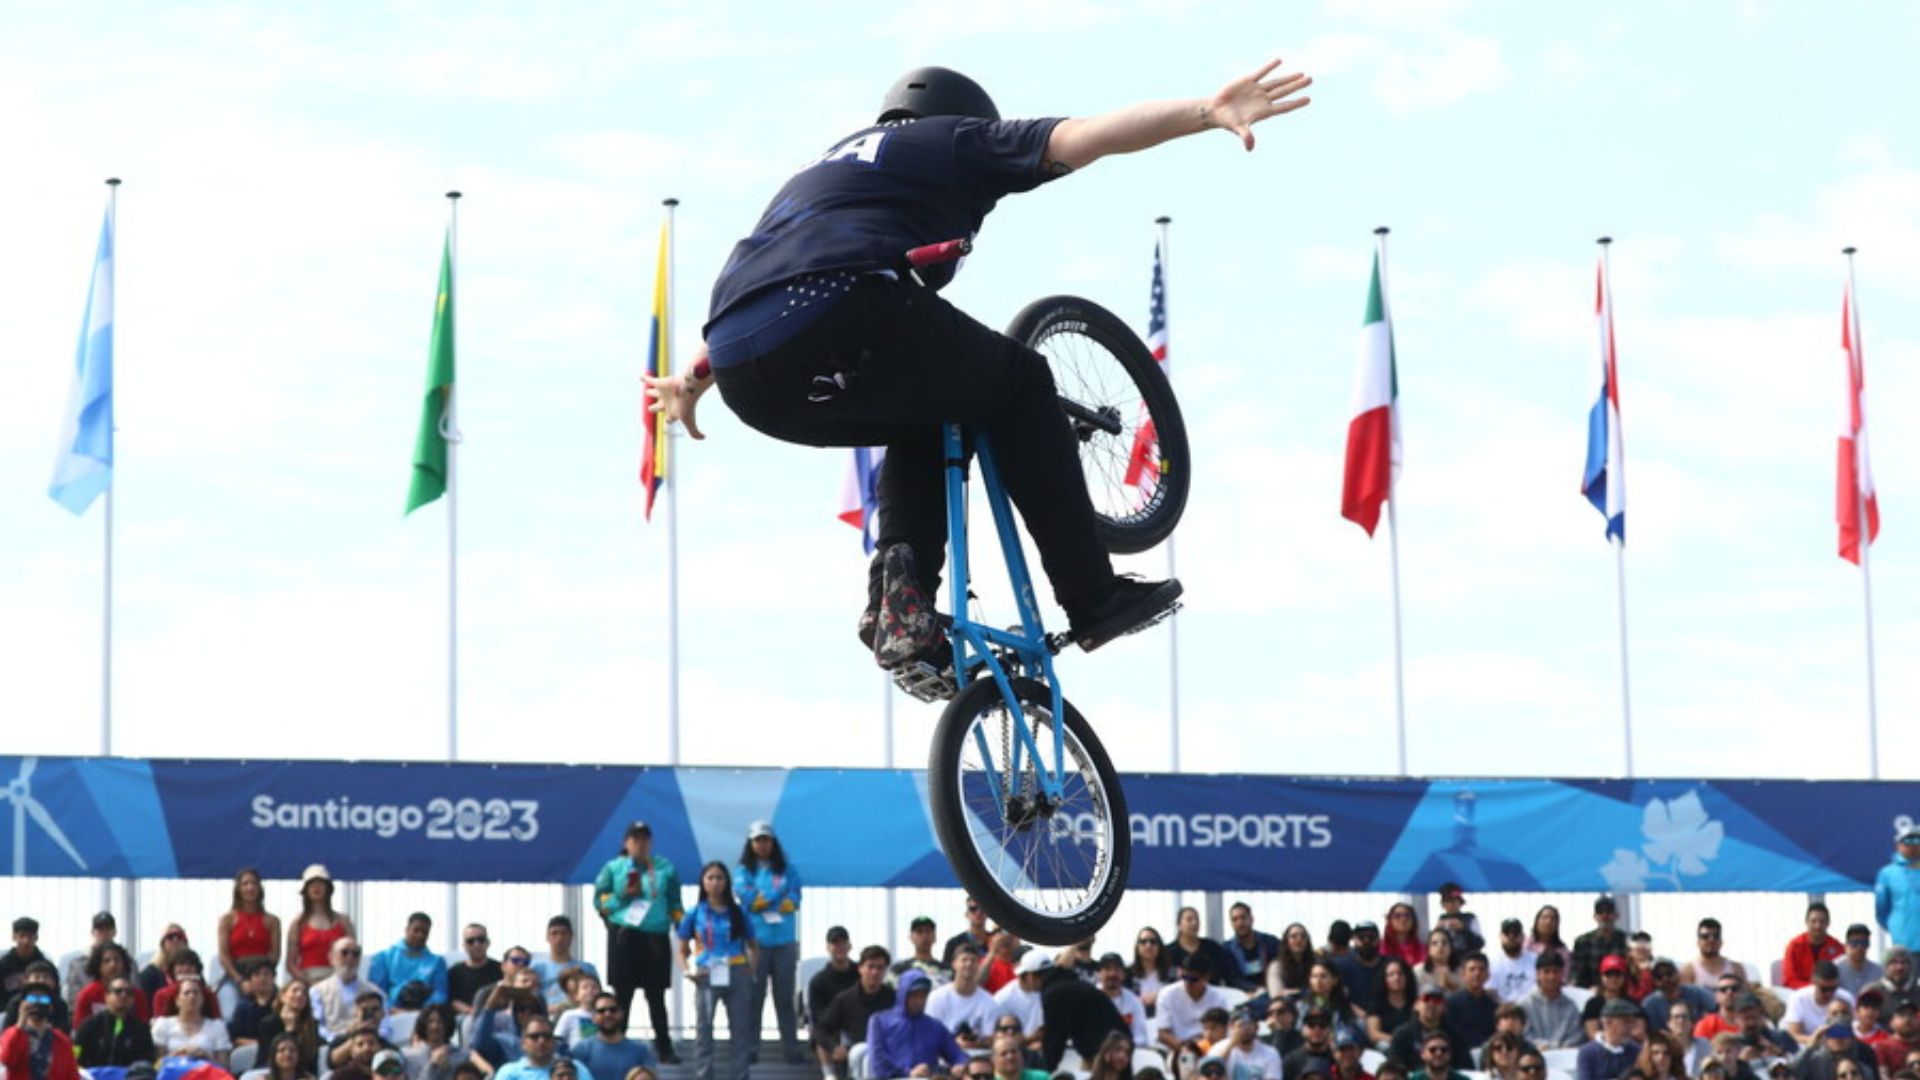 Female's BMX Freestyle: American Rider Roberts Takes the Top Spot in the Final